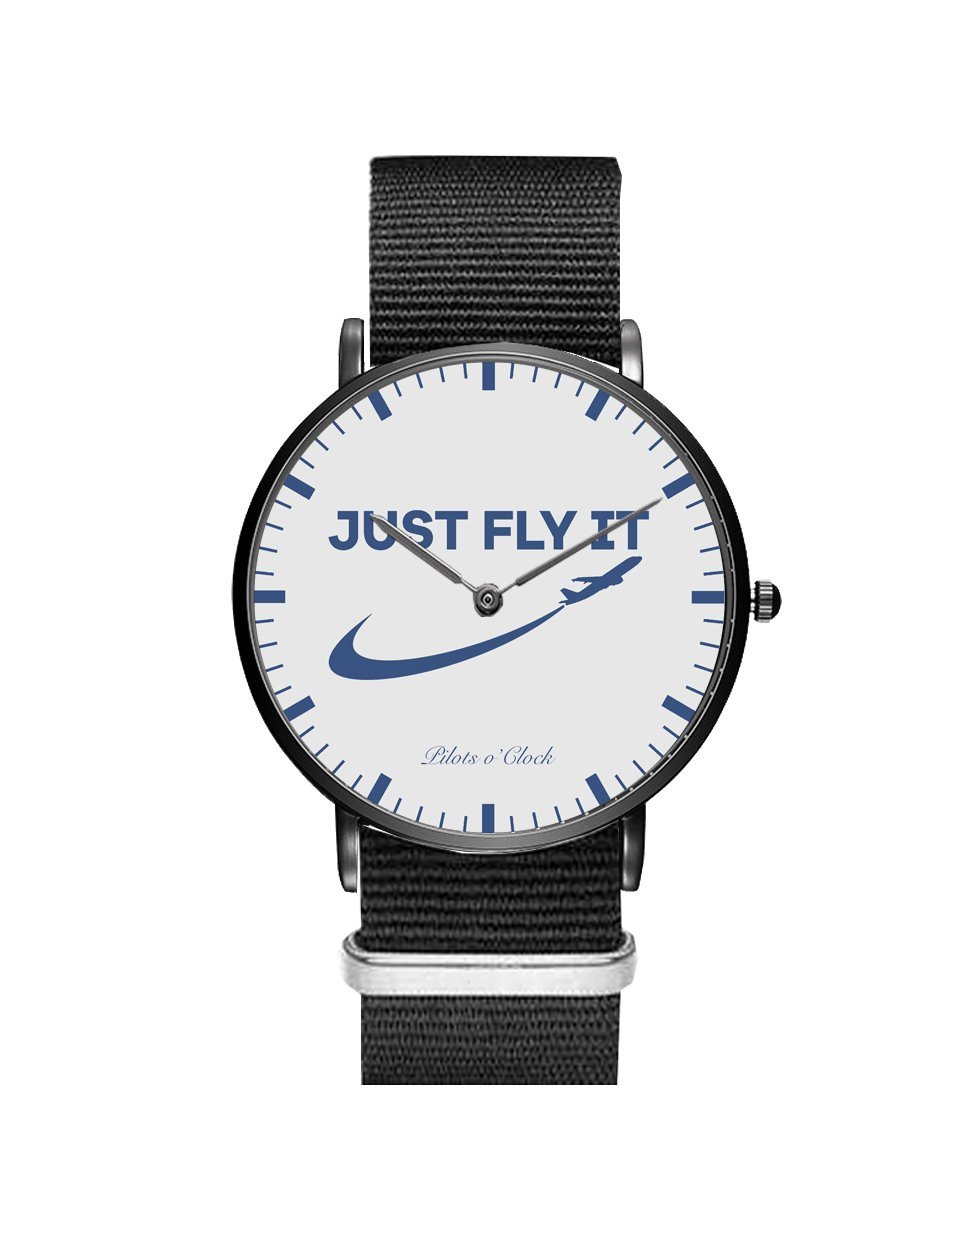 Just Fly It 2 Leather Strap Watches Pilot Eyes Store Black & Black Nylon Strap 